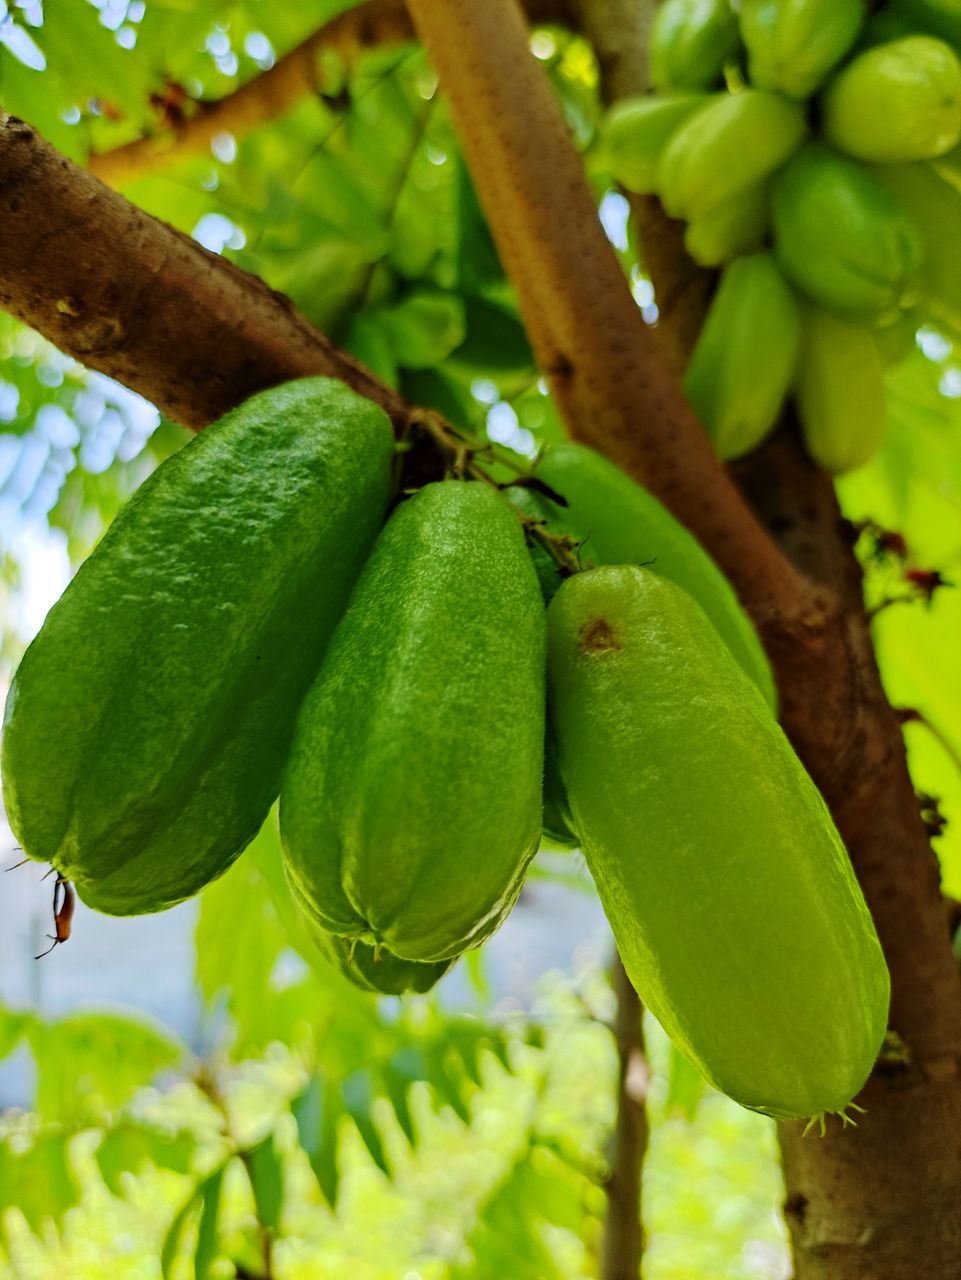 CLOSE-UP OF FRESH GREEN FRUITS ON TREE